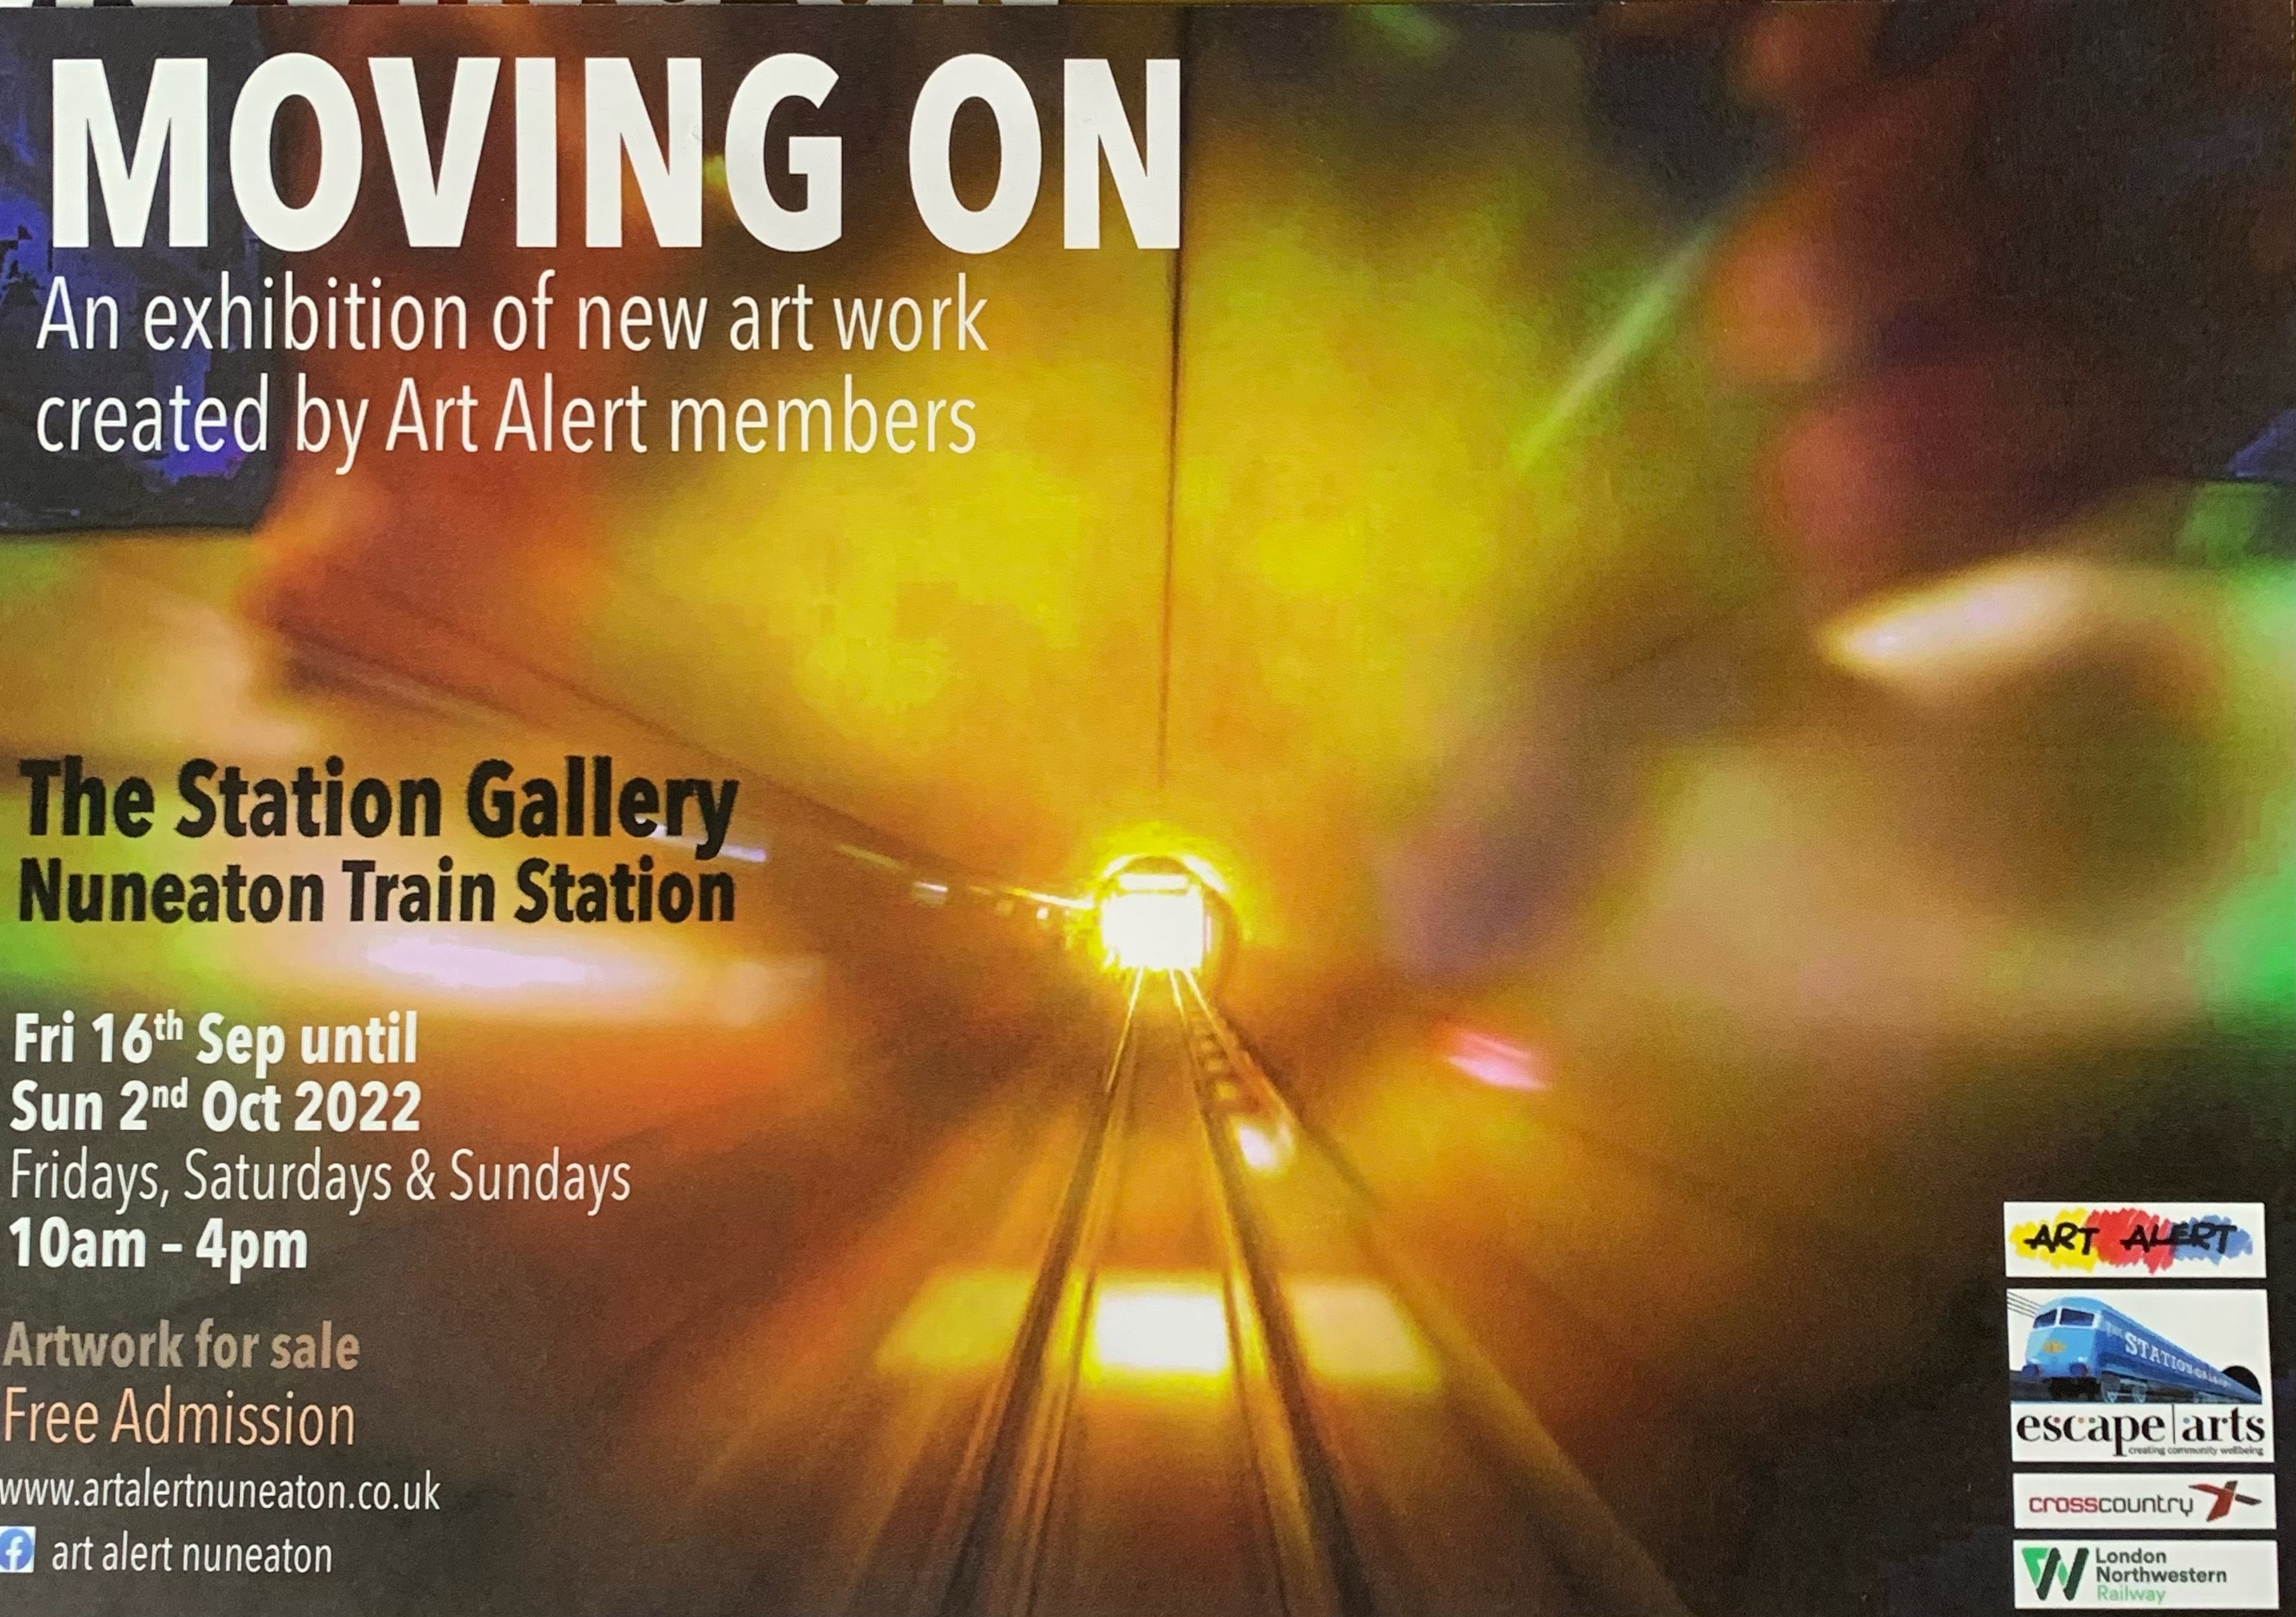 Moving on exhibition 